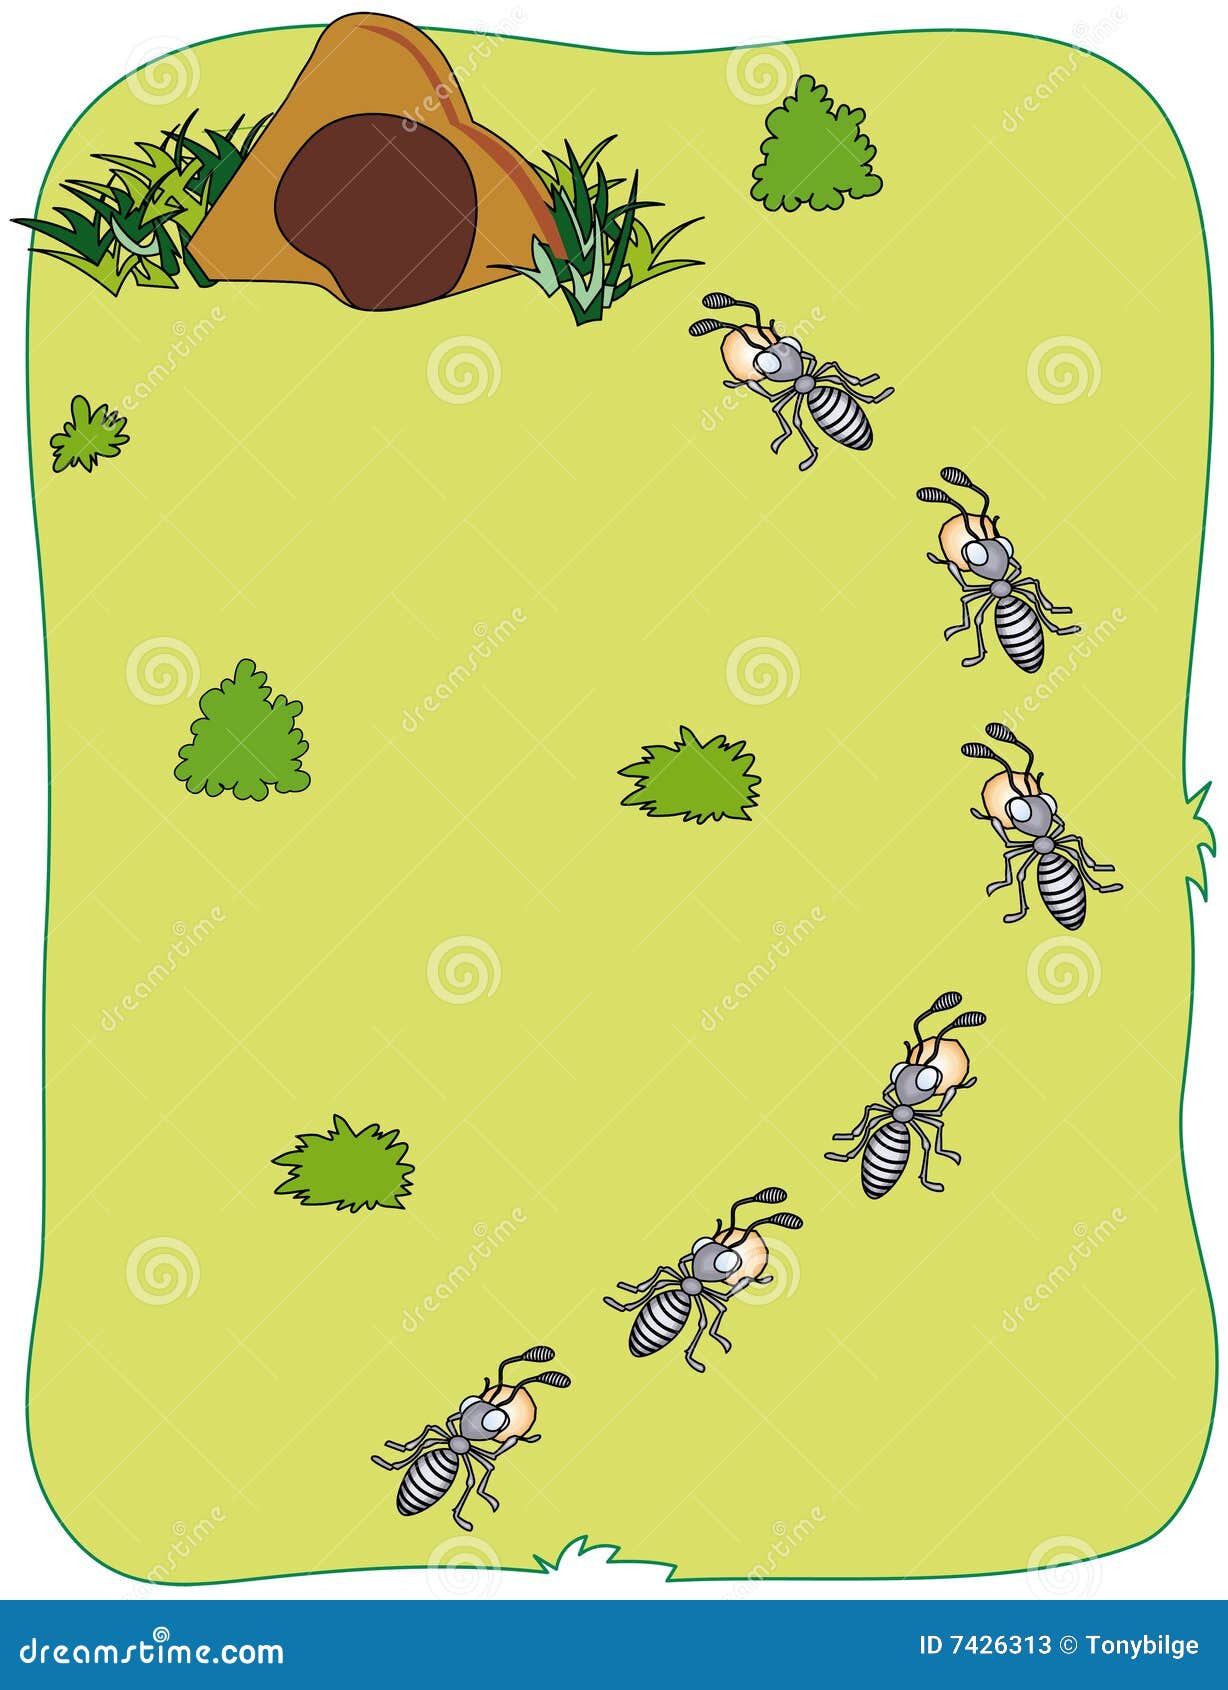 Ants carry food stock vector. Illustration of clip ...